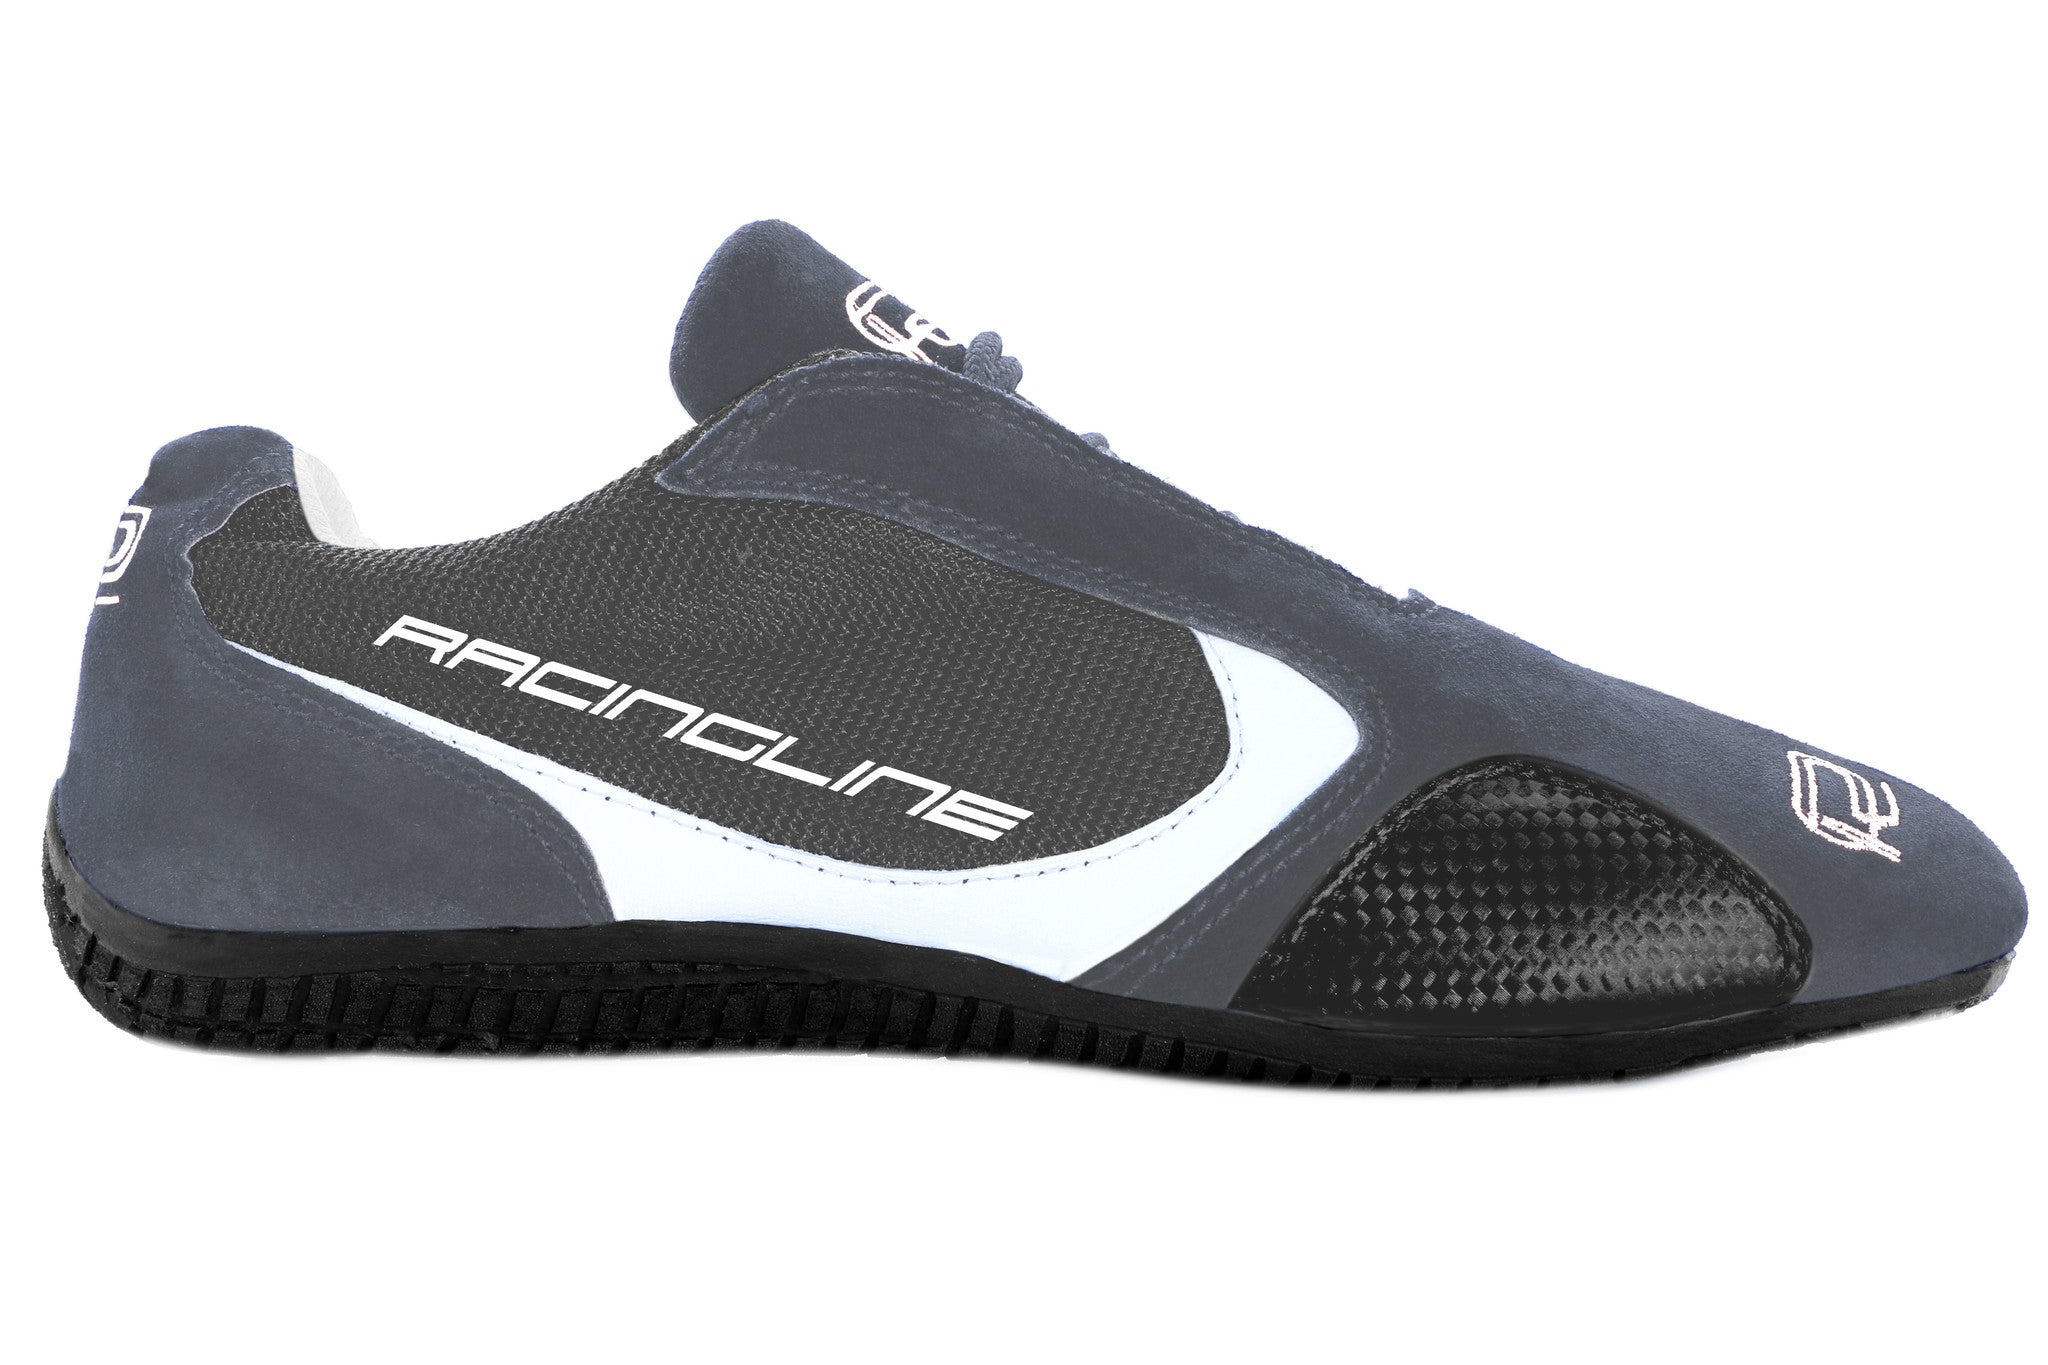 shoes for sim racing